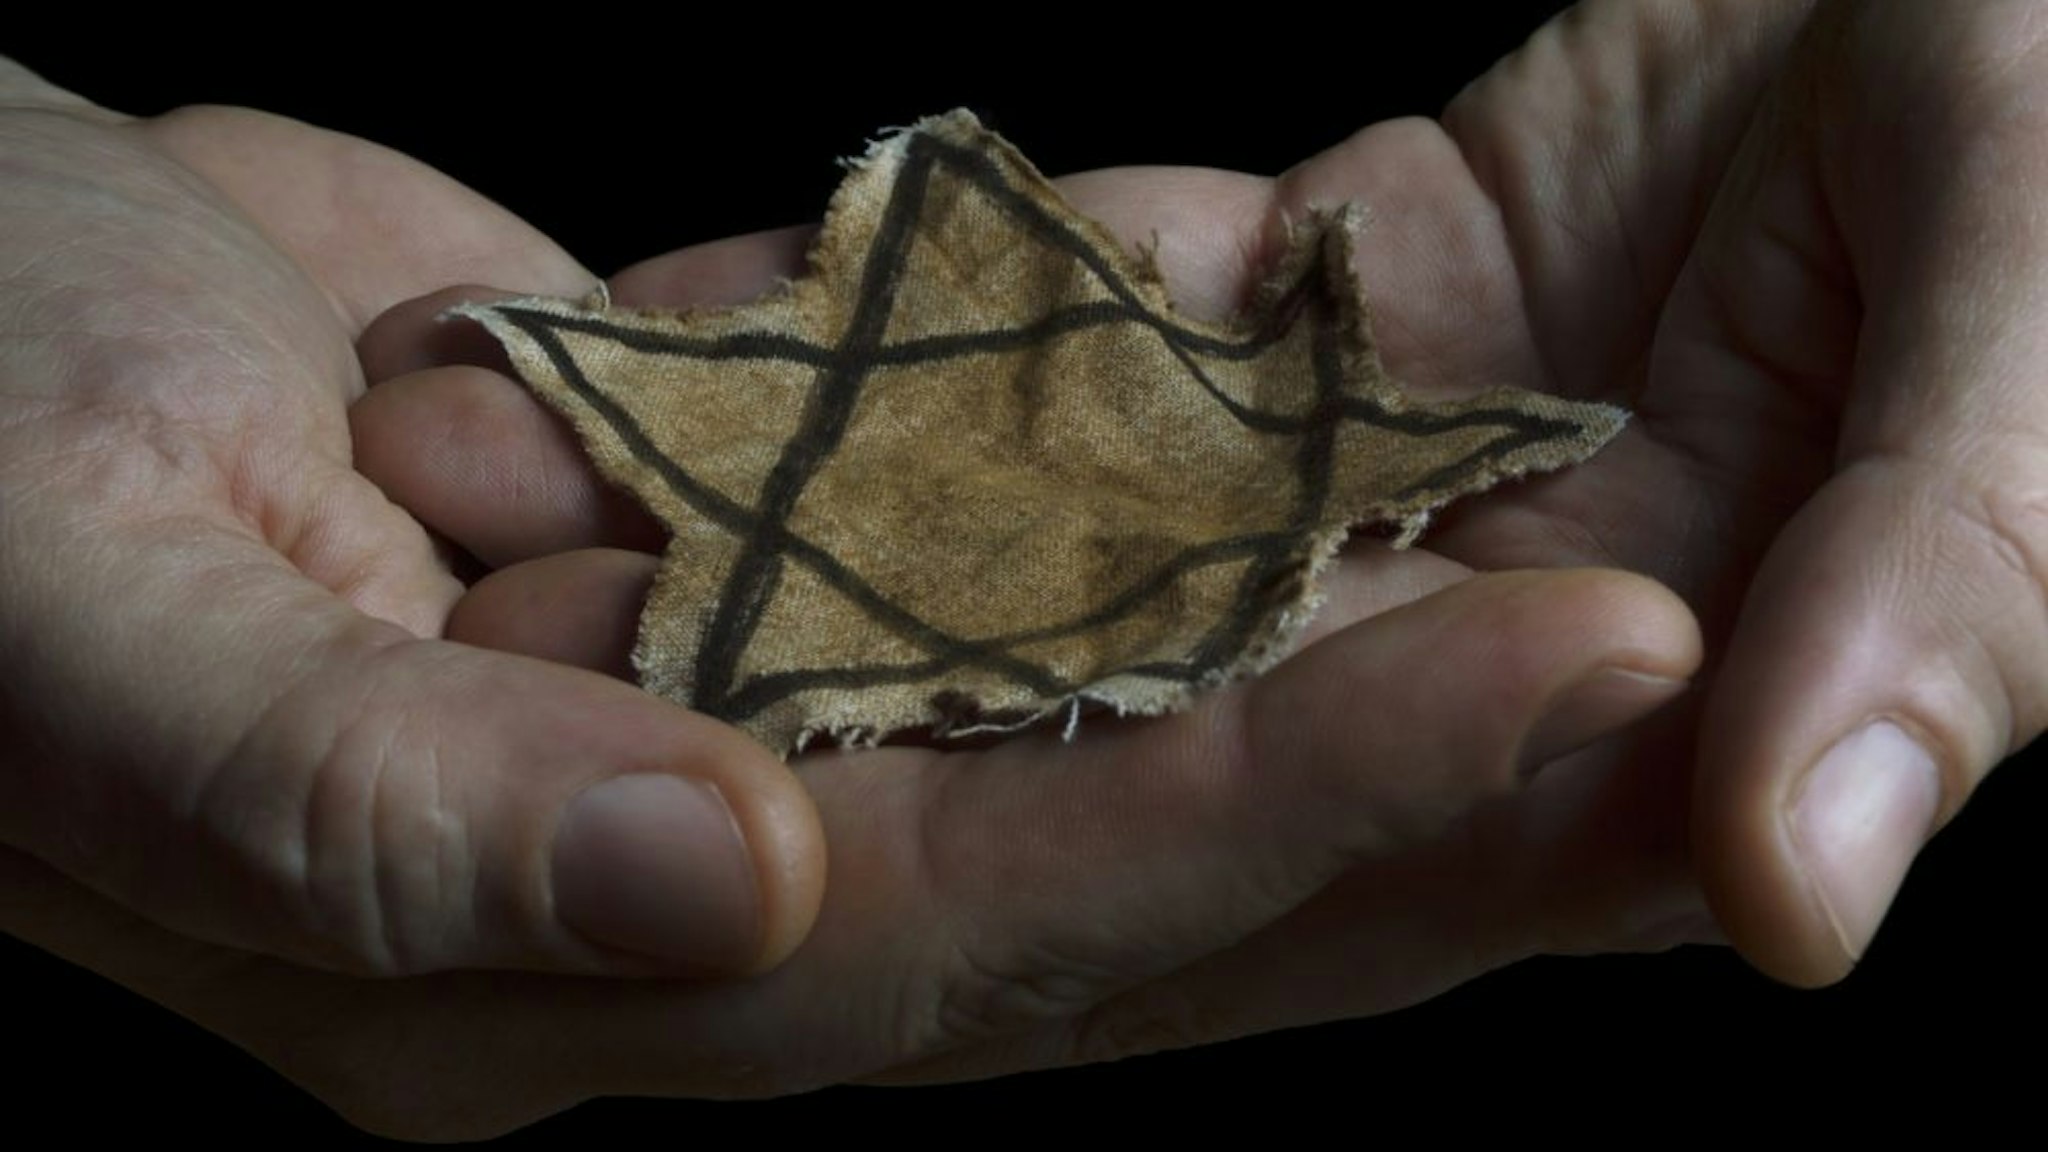 Closeup of a ragged Jewish badge in the hands of a man